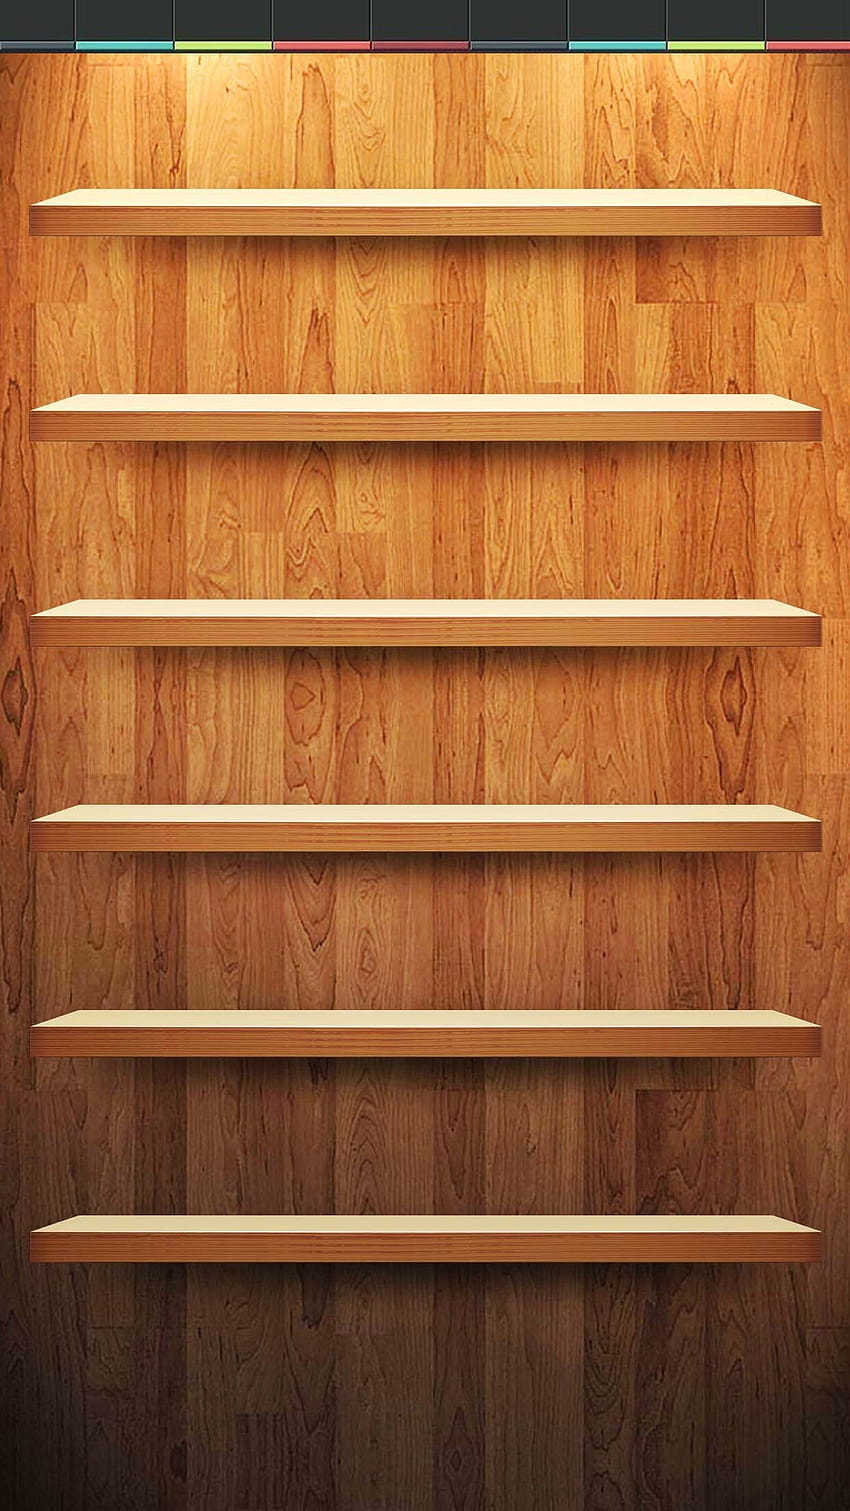 Wood App Shelf with Status bar backgrounds for iPhone 6/6s Plus : r/i HD phone wallpaper